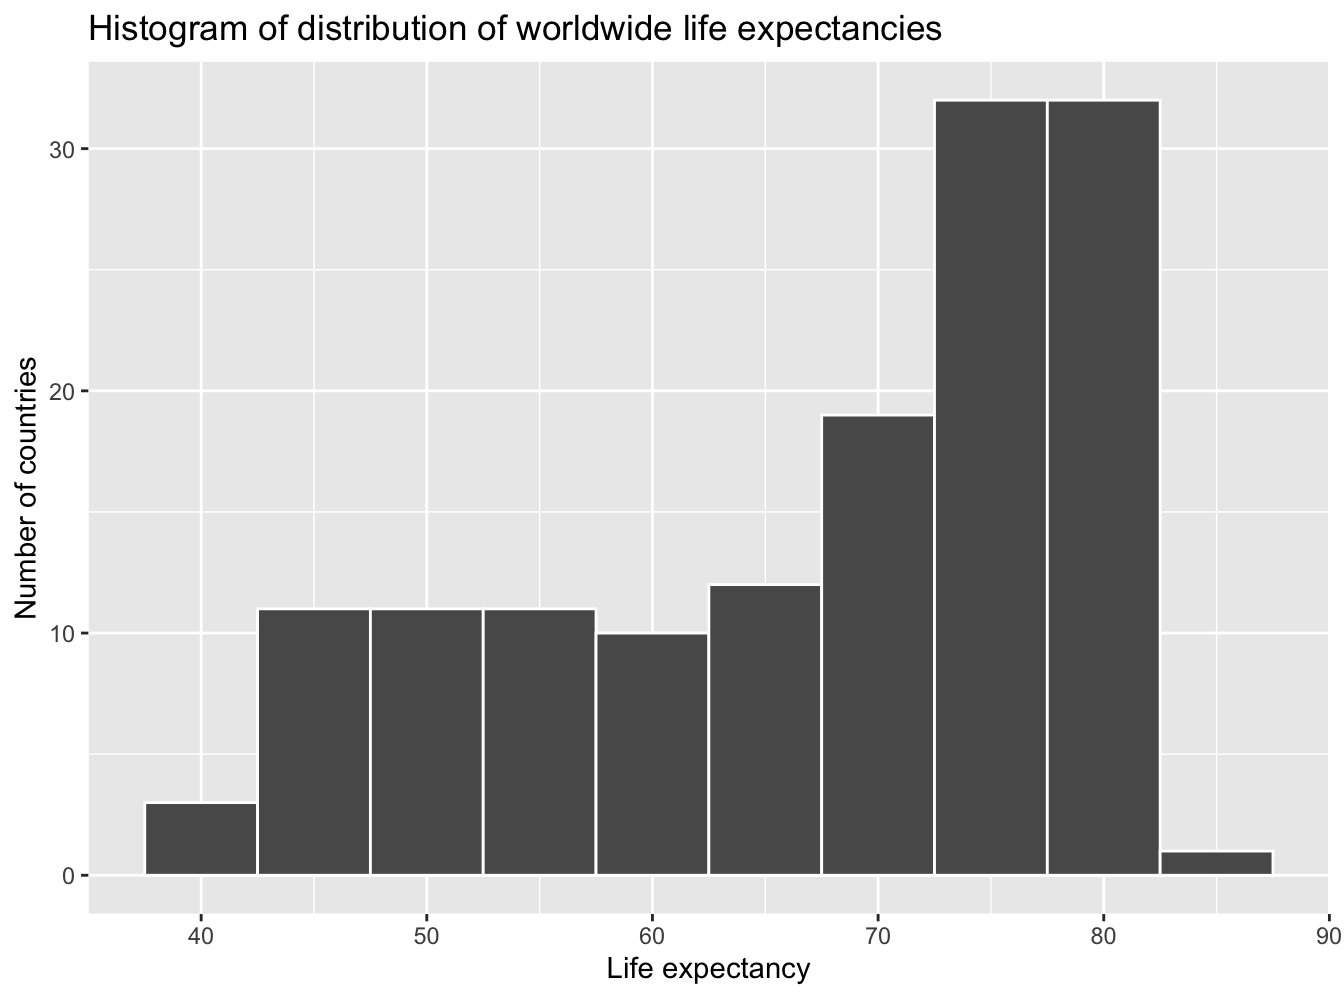 Histogram of life expectancy in 2007.